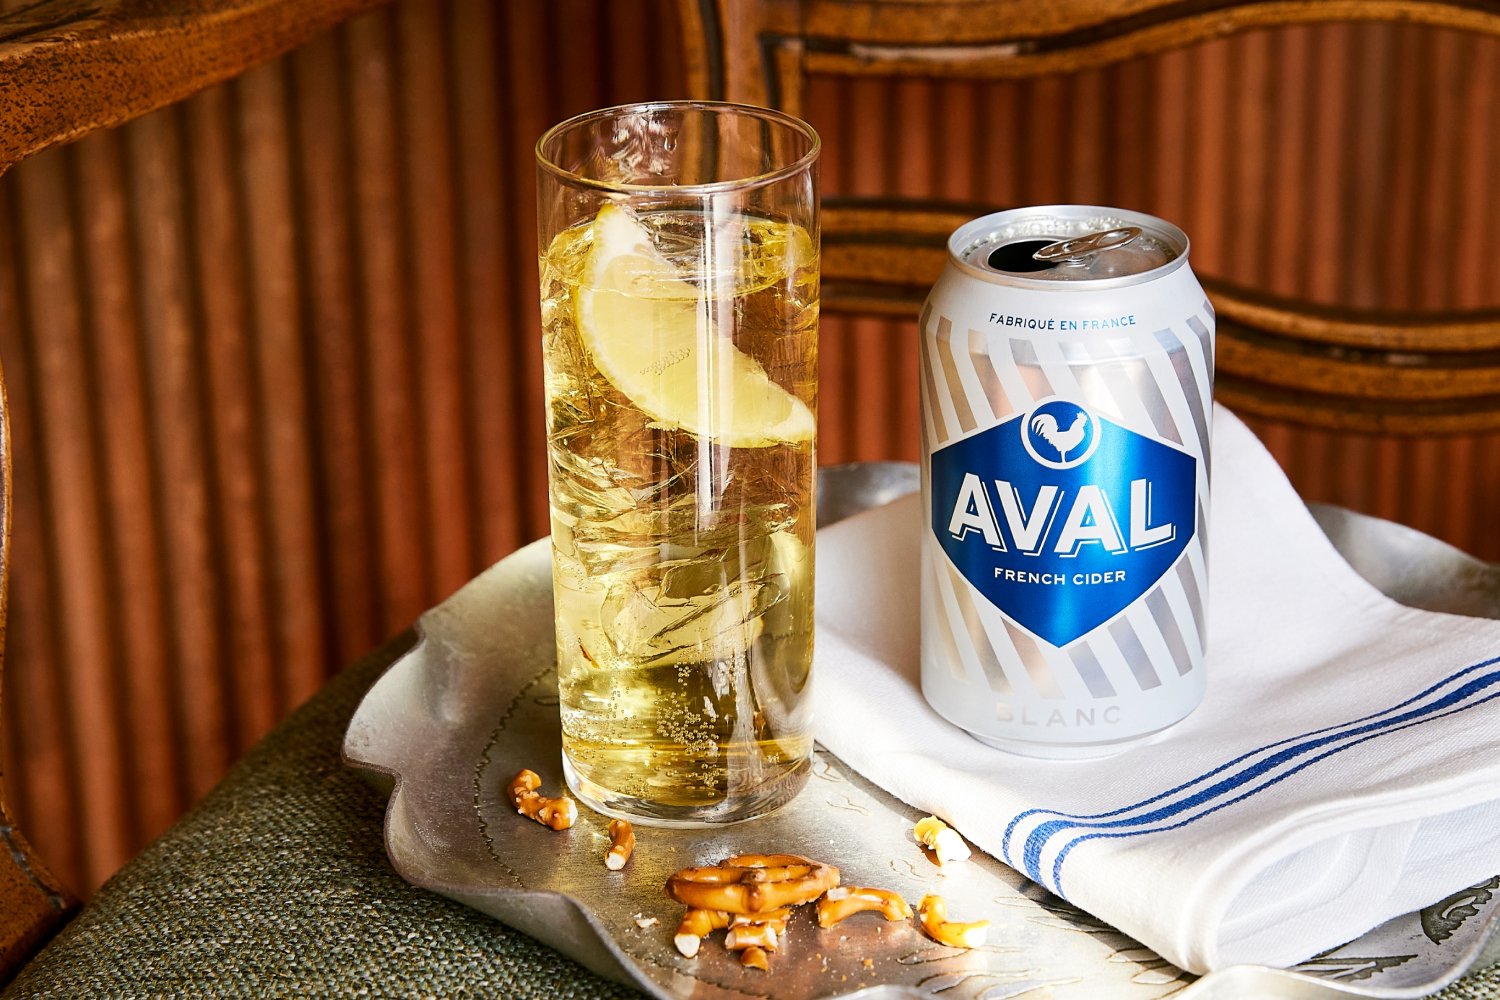 AVAL@First-ever Modern Brand of French Cider